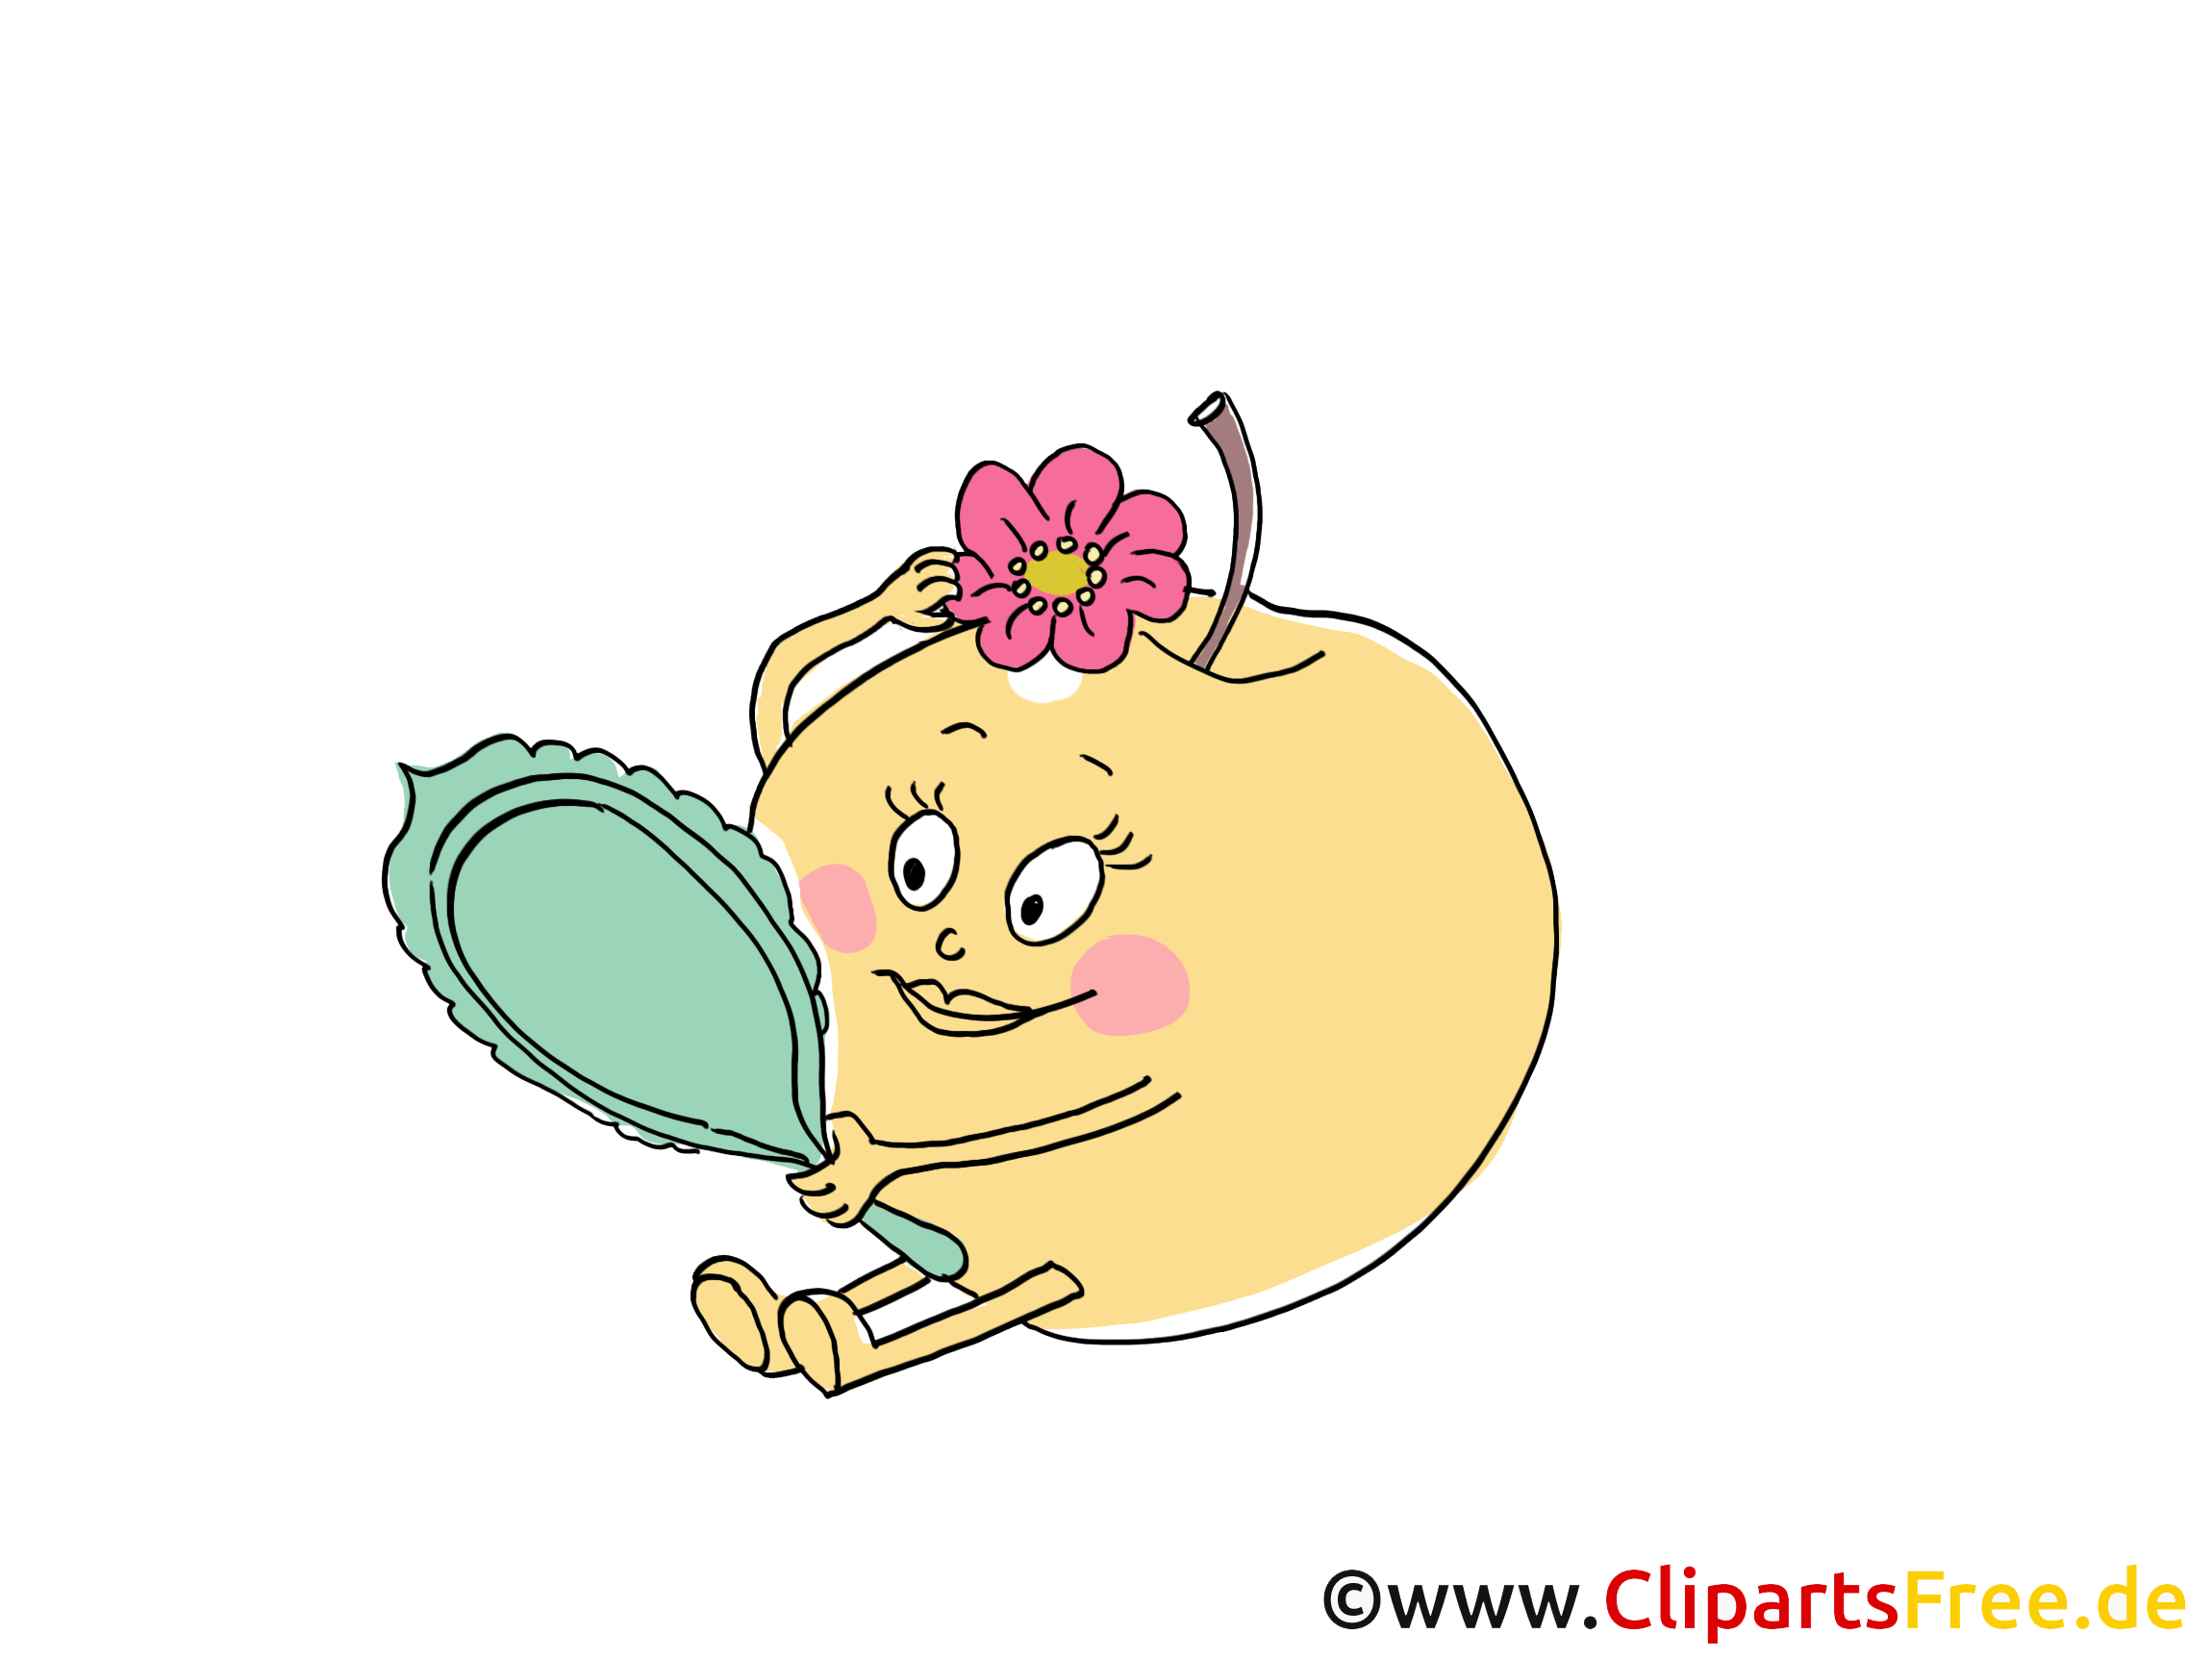 clipart picture of apple - photo #12